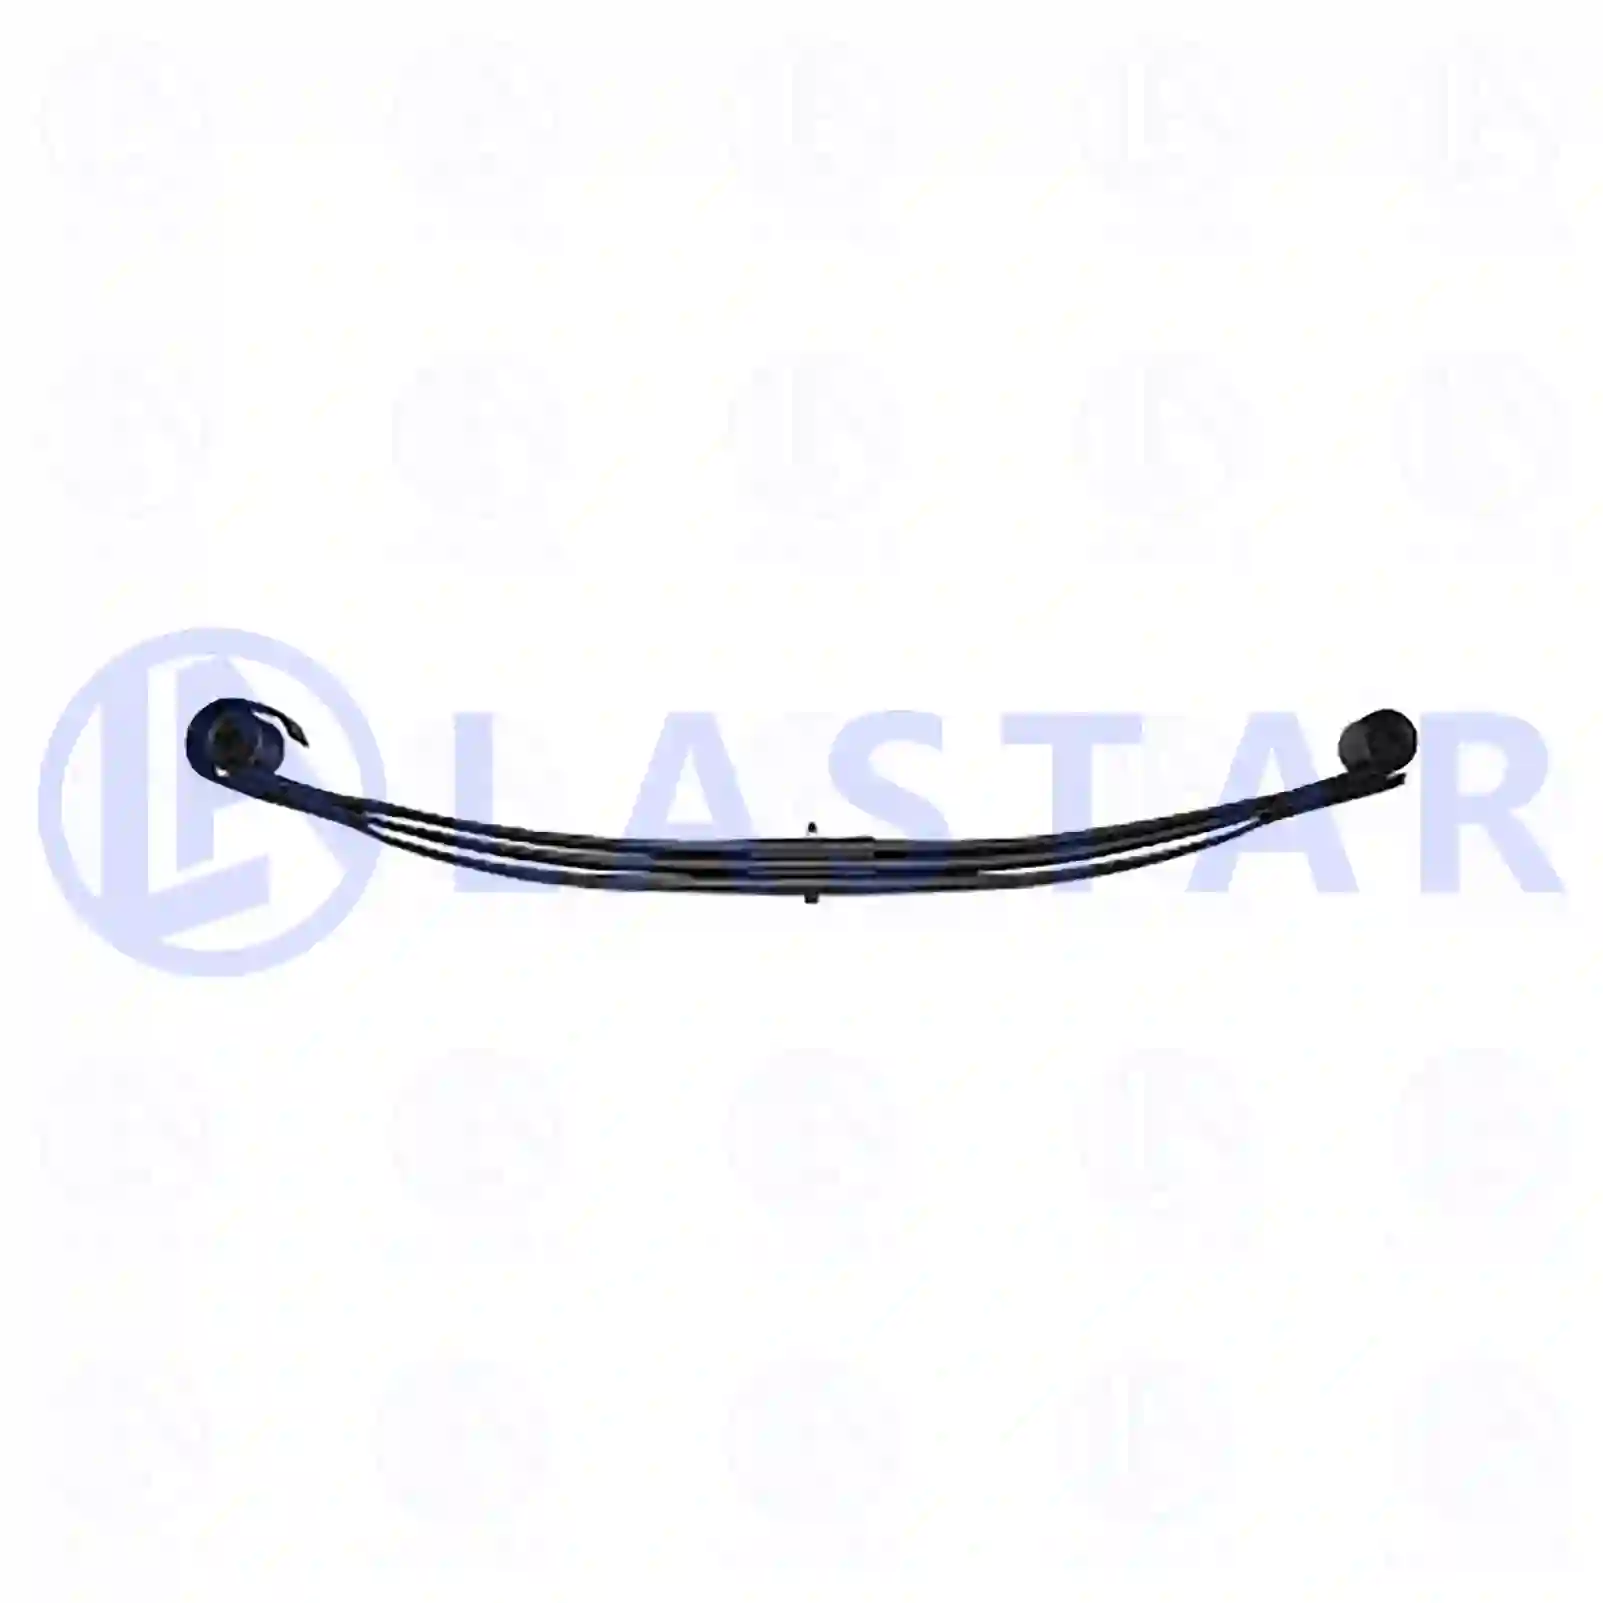 Leaf spring, front, 77727126, 3753201402, 9433200302, 9433201102 ||  77727126 Lastar Spare Part | Truck Spare Parts, Auotomotive Spare Parts Leaf spring, front, 77727126, 3753201402, 9433200302, 9433201102 ||  77727126 Lastar Spare Part | Truck Spare Parts, Auotomotive Spare Parts